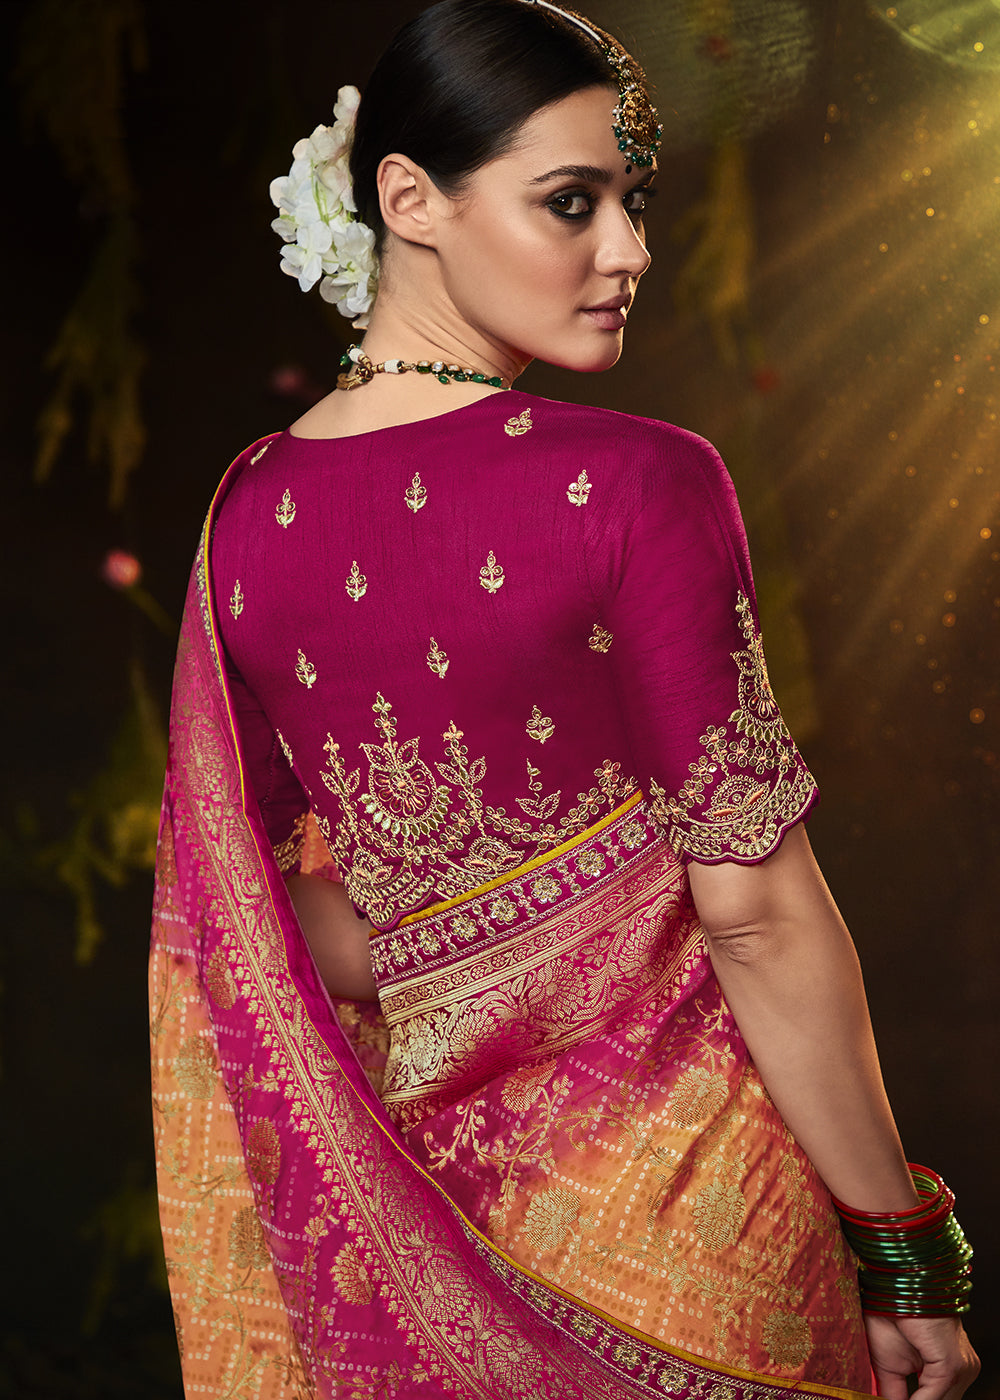 Pretty Pink Georgette Bandhani Saree for a Feminine Look